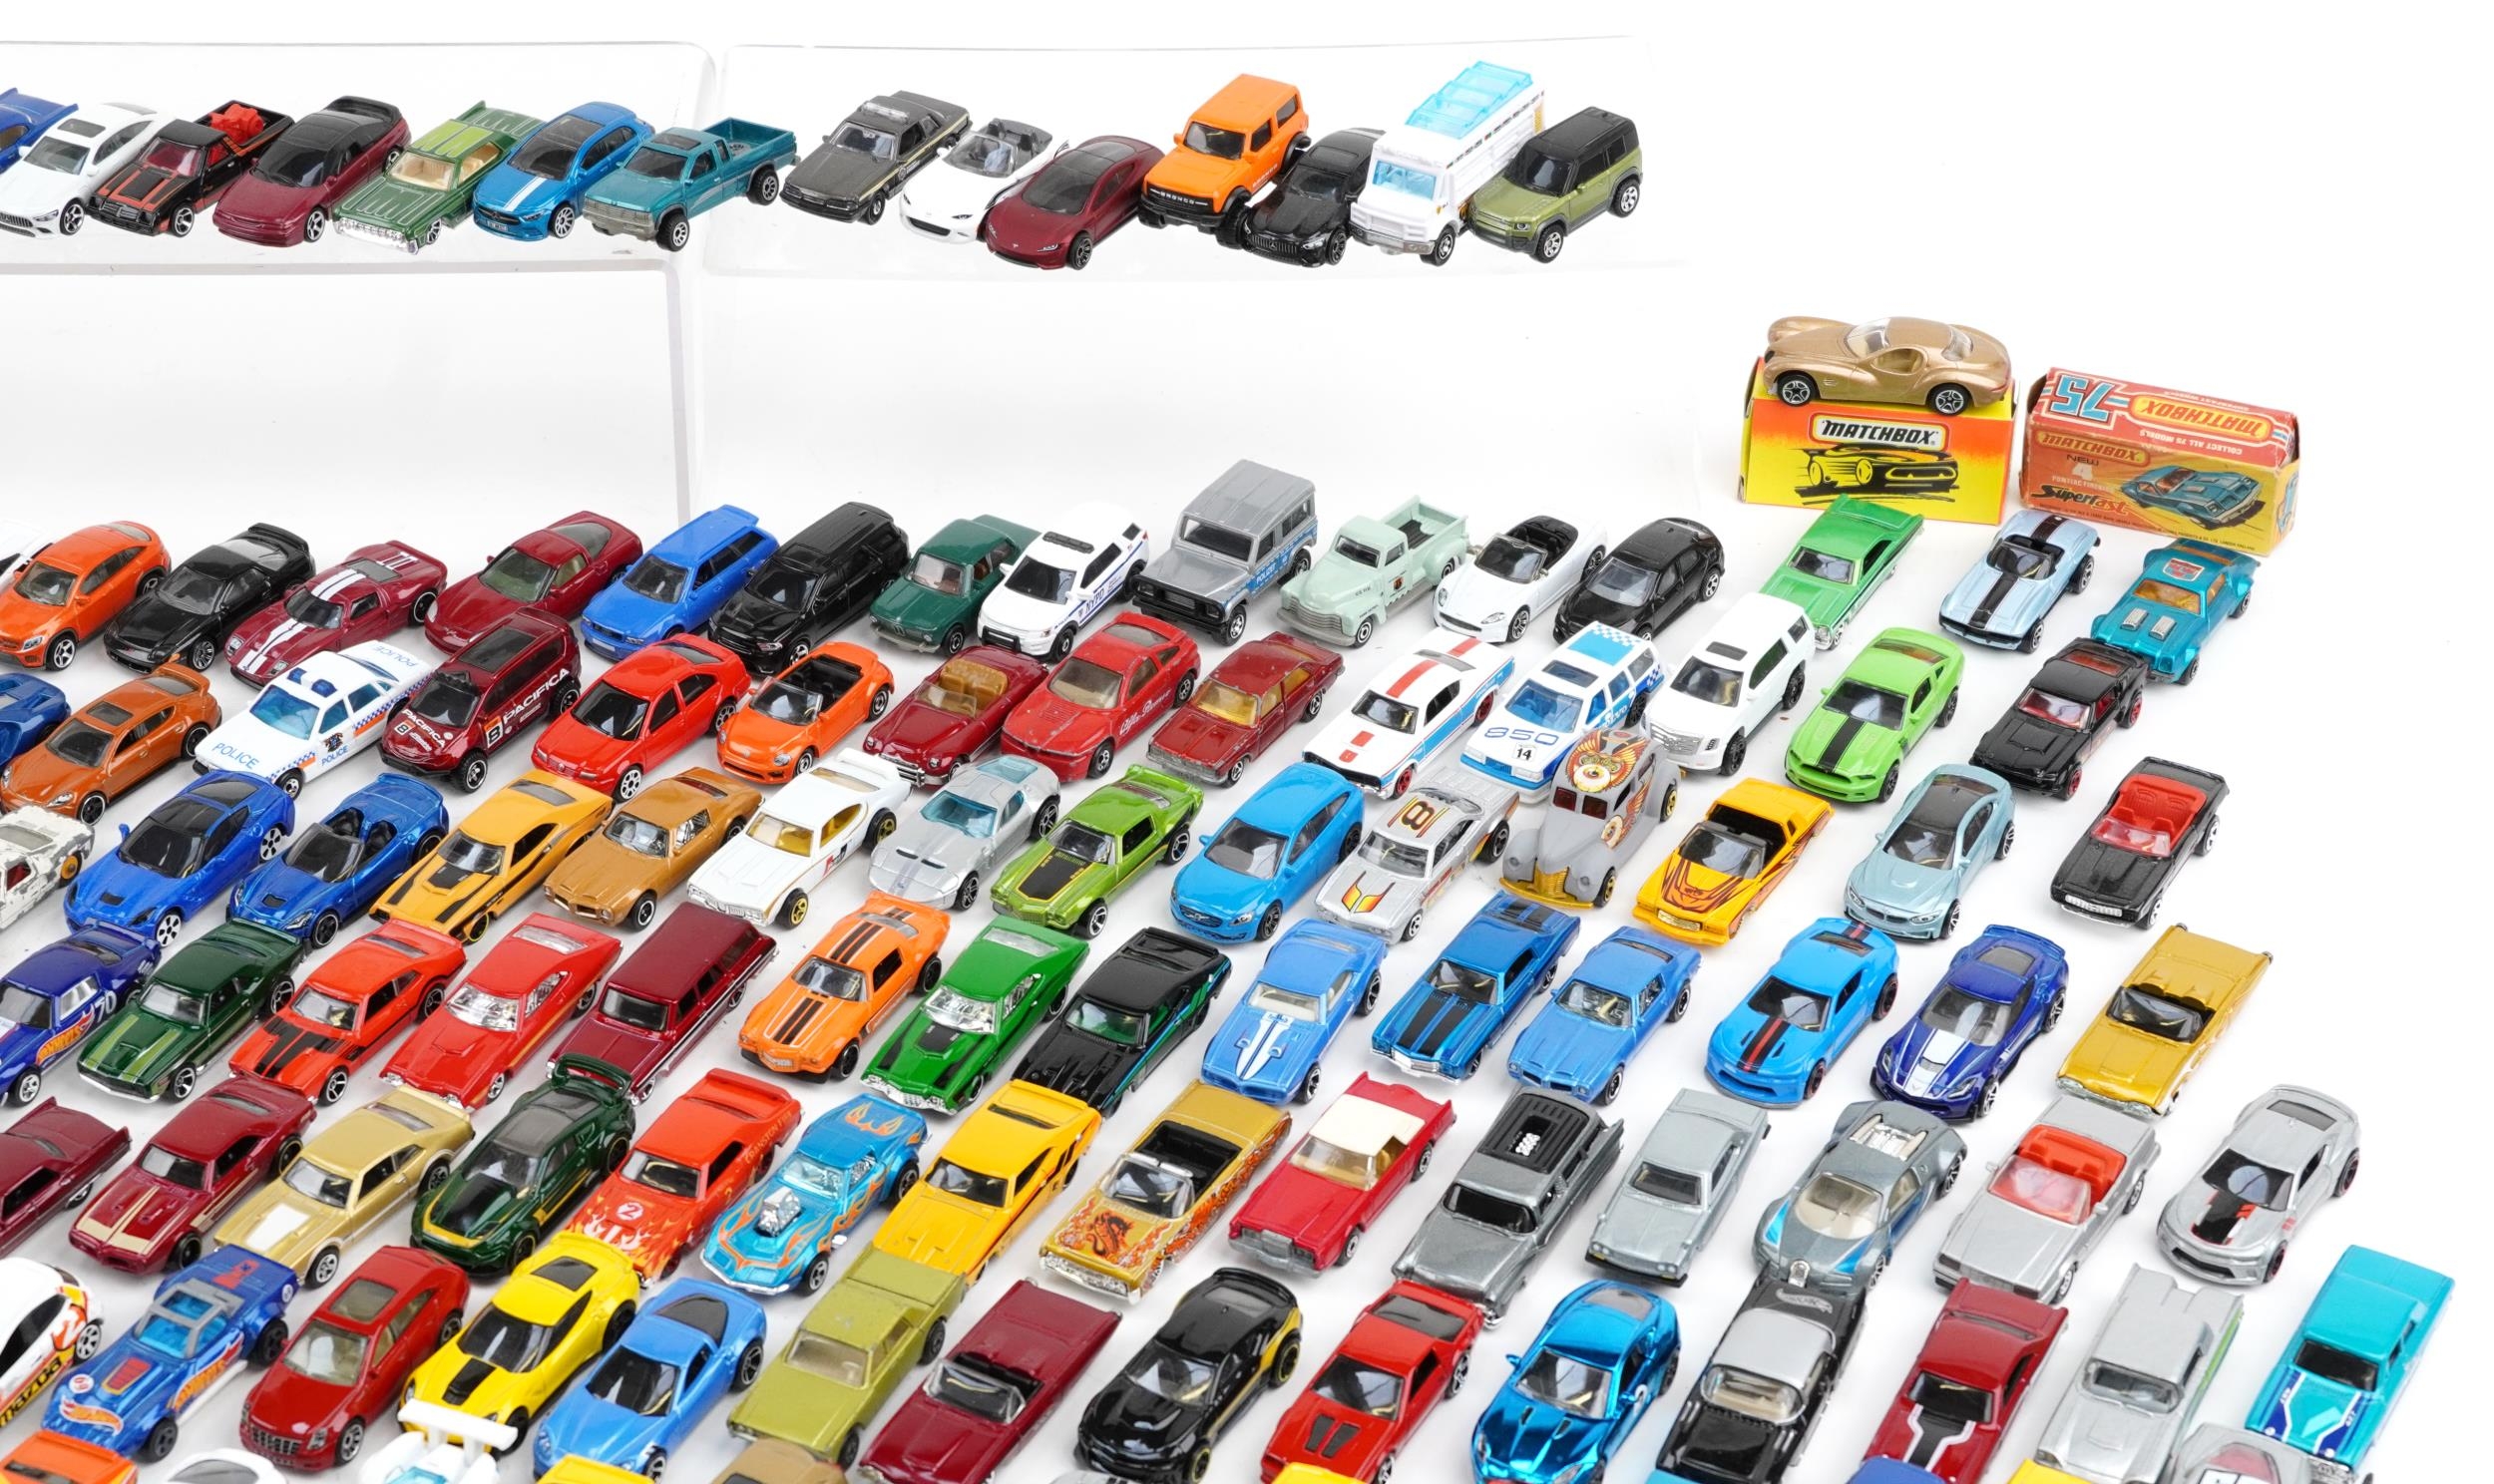 Large collection of diecast vehicles, predominantly Matchbox and Hot Wheels - Image 3 of 5